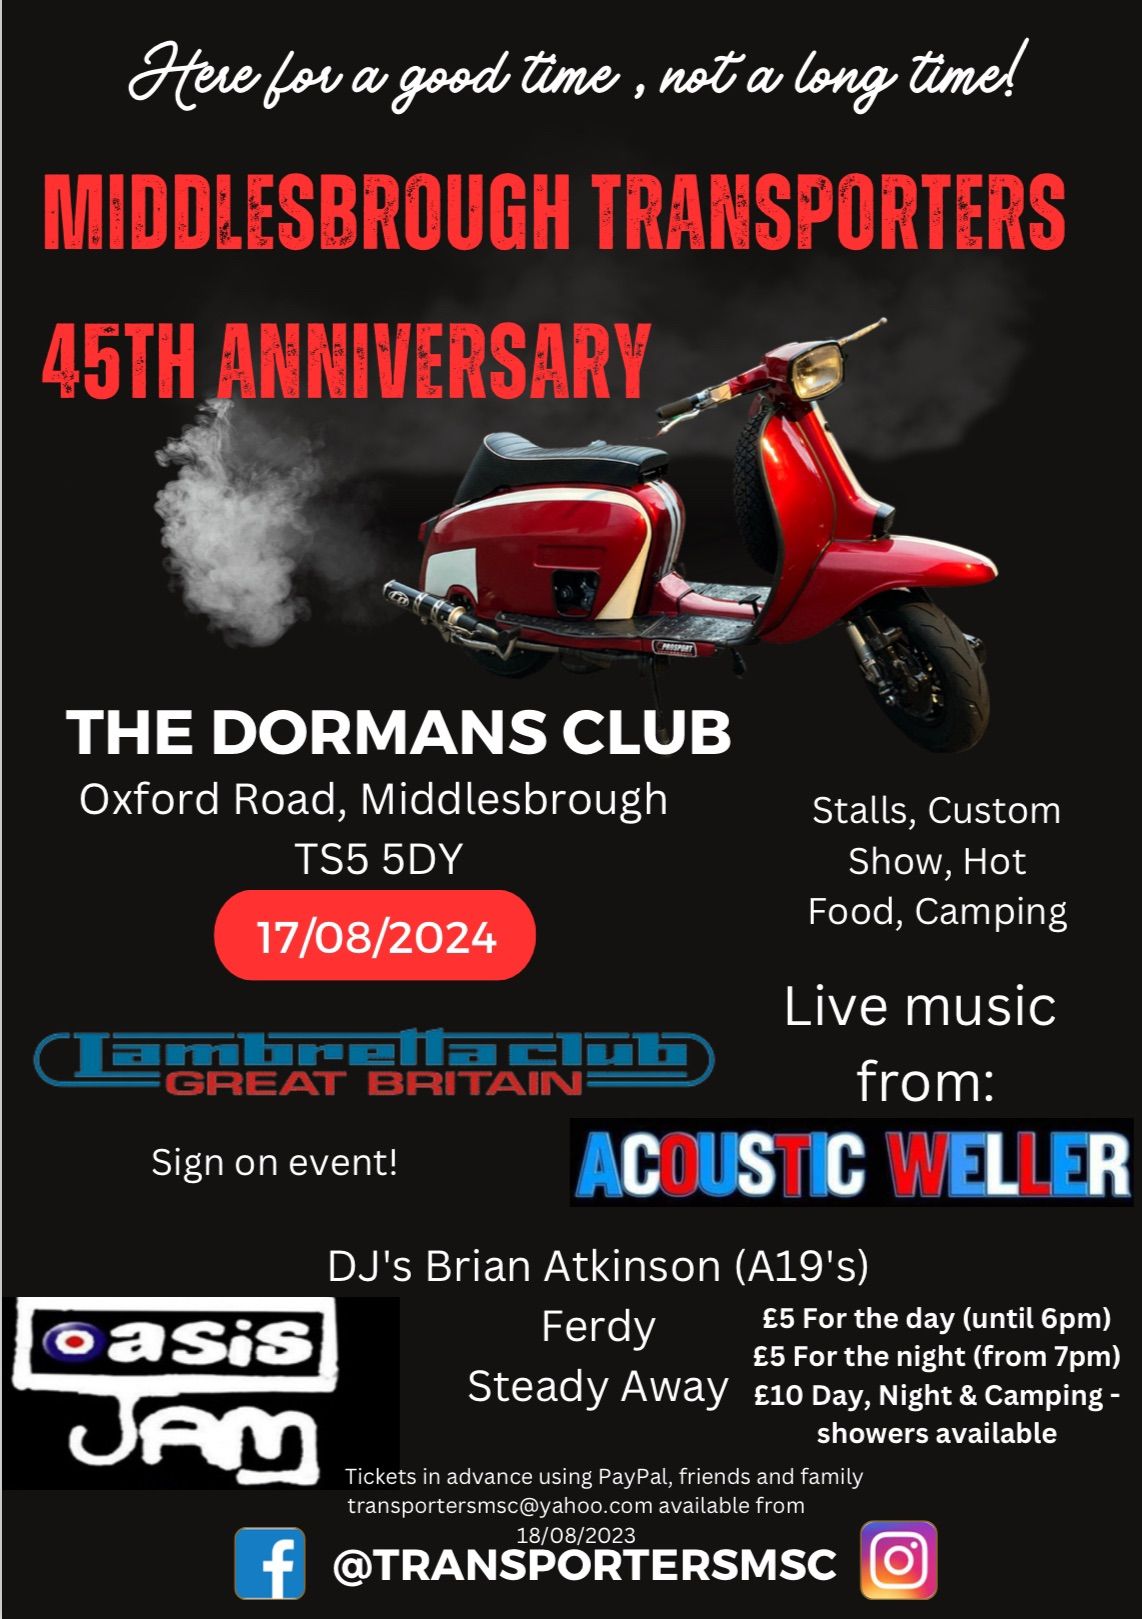 Middlesbrough Transporters Scooter Club 45th Anniversary Celebration